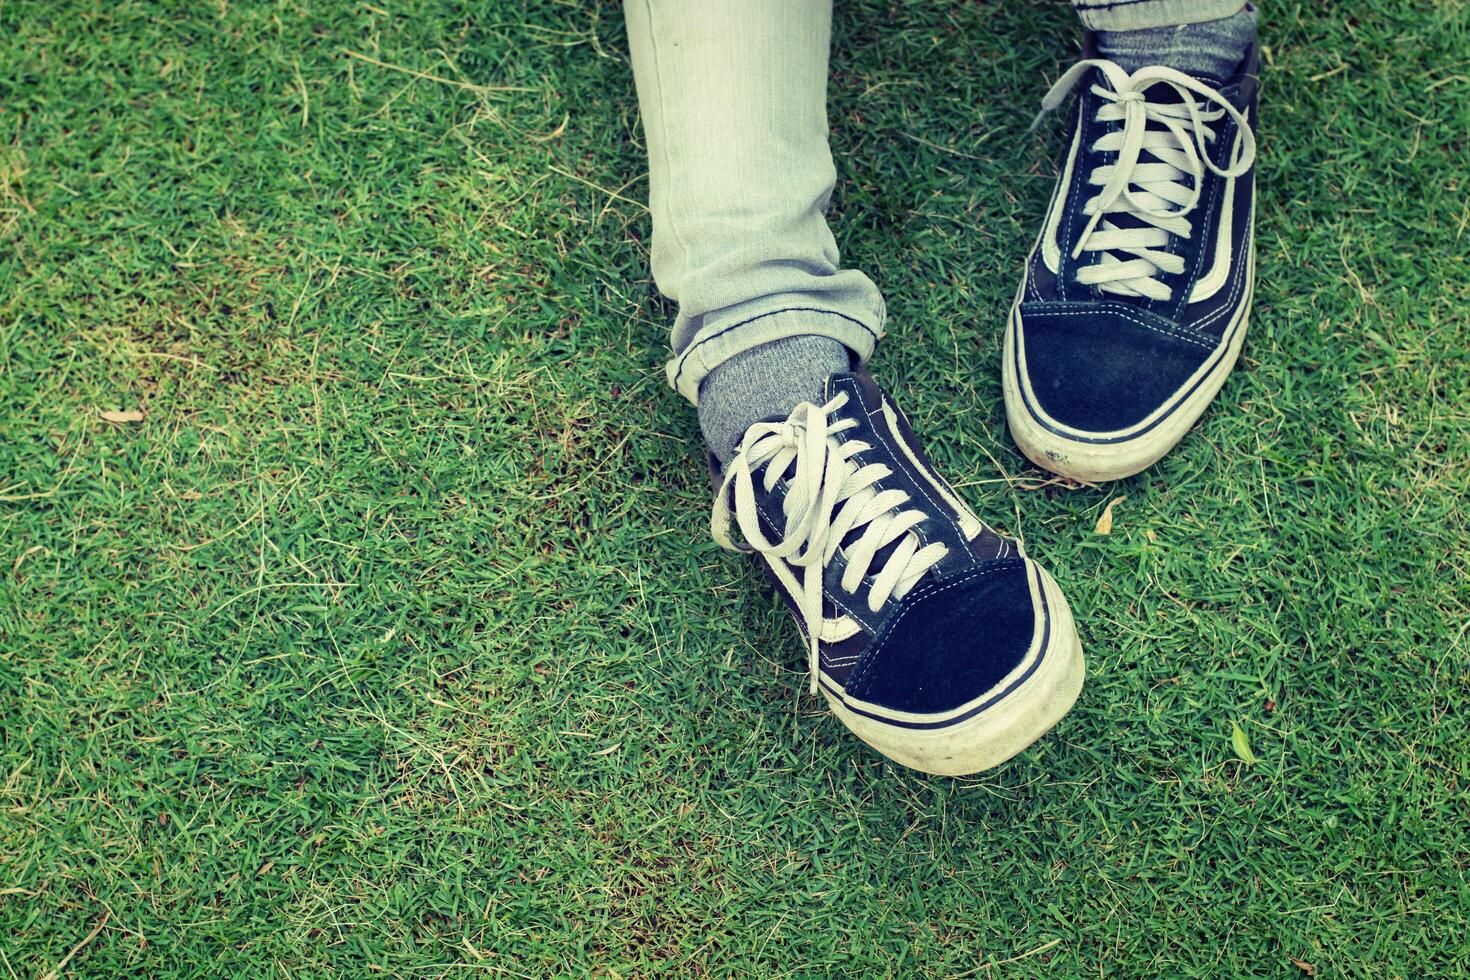 Woman's legs wearing jeans with sneaker sitting on the grass. photo